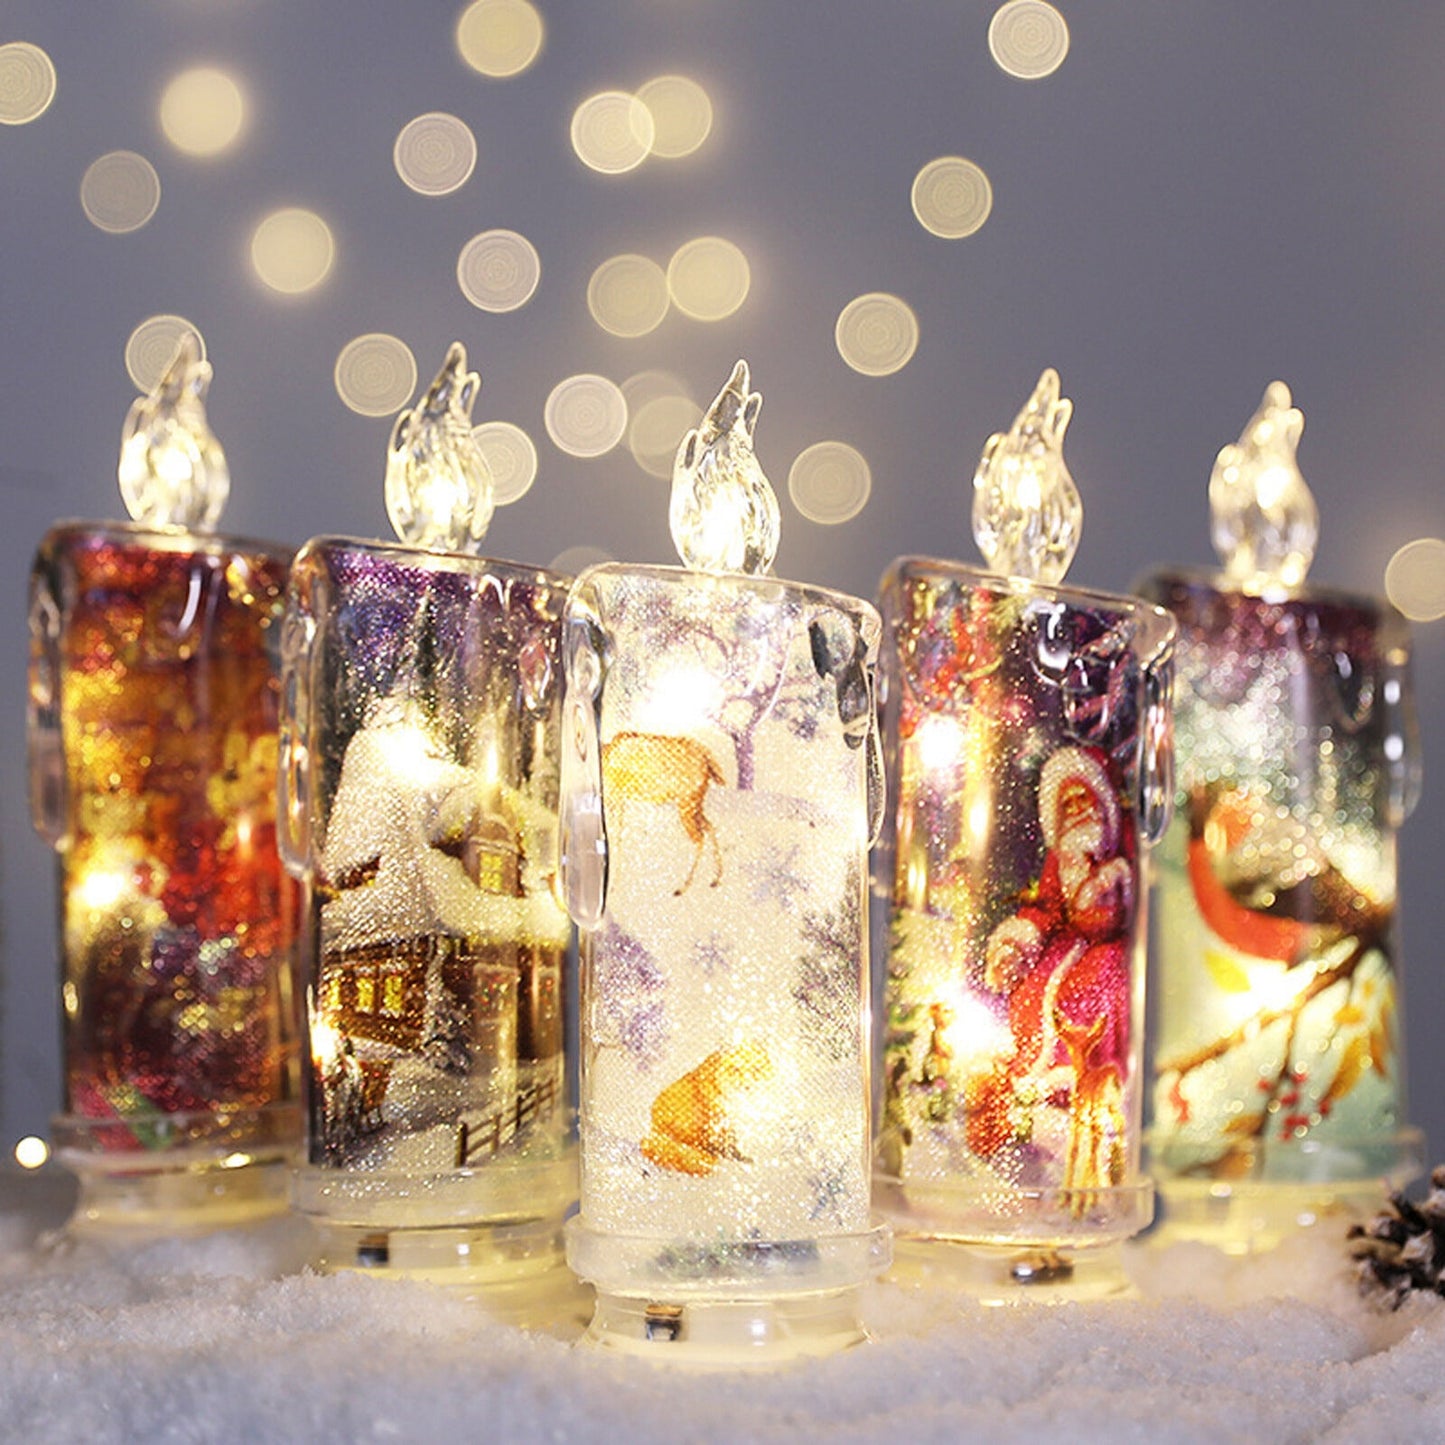 The Best Selling LED Christmas Candles - Various Styles Available - Fast Free Shipping Worldwide